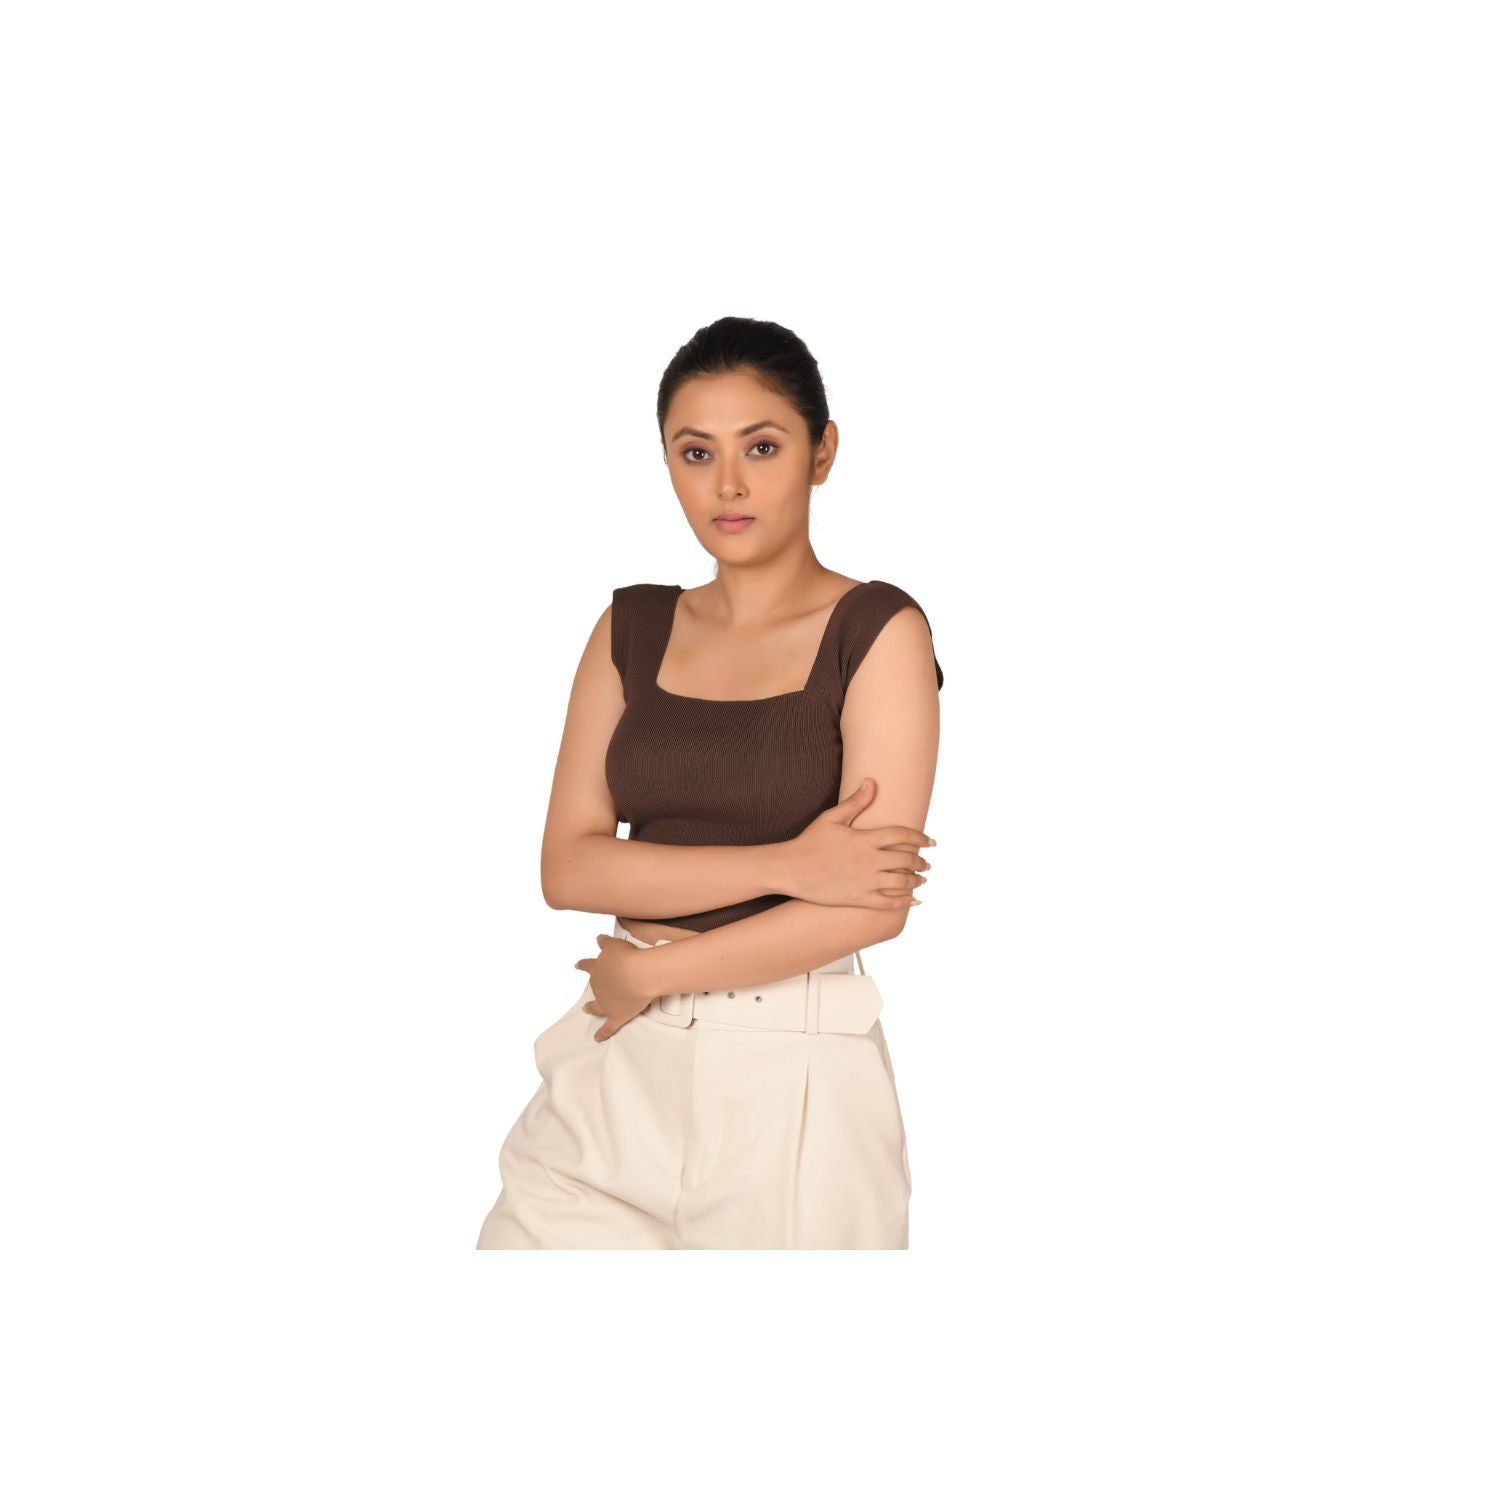 Square Neck Blouse - Chocolate Brown - Blouse featured